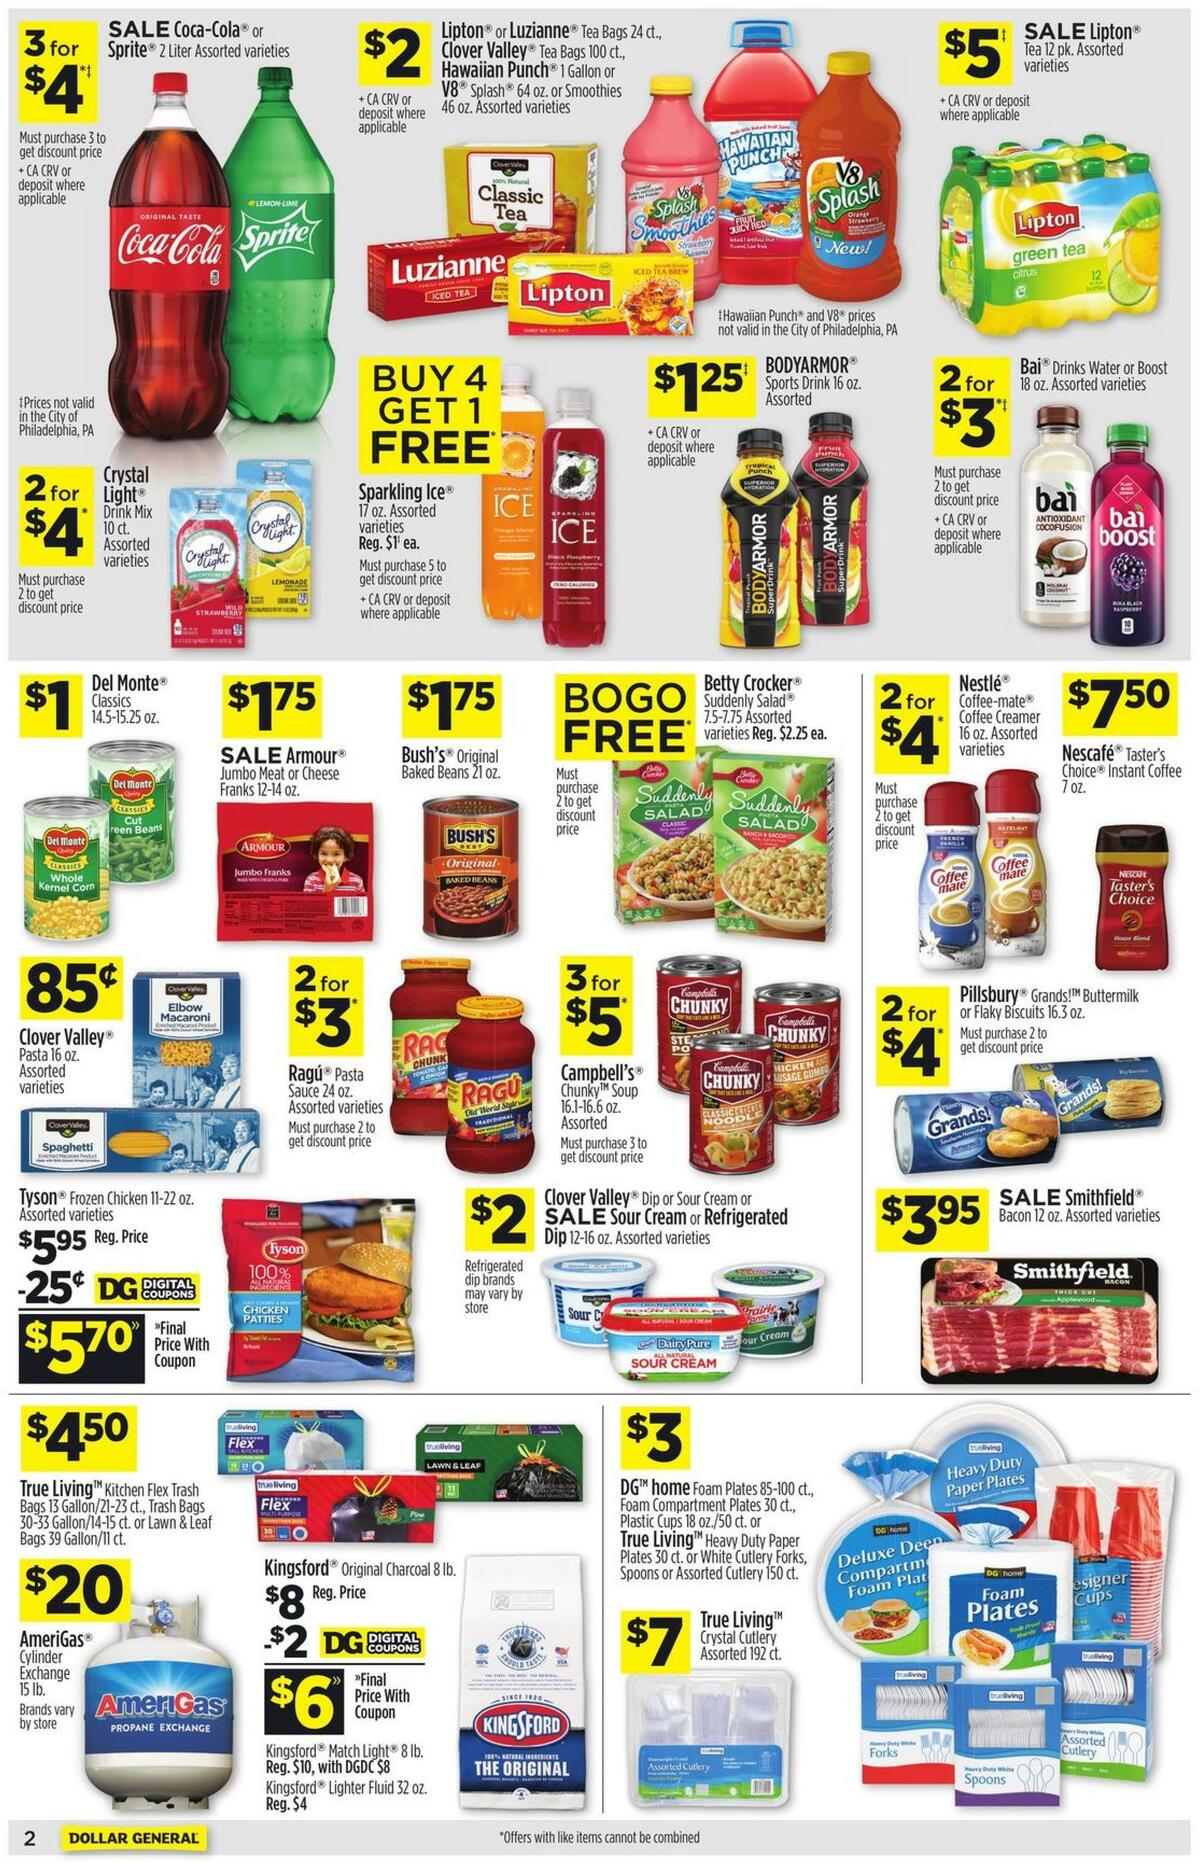 Dollar General Weekly Ad from August 22